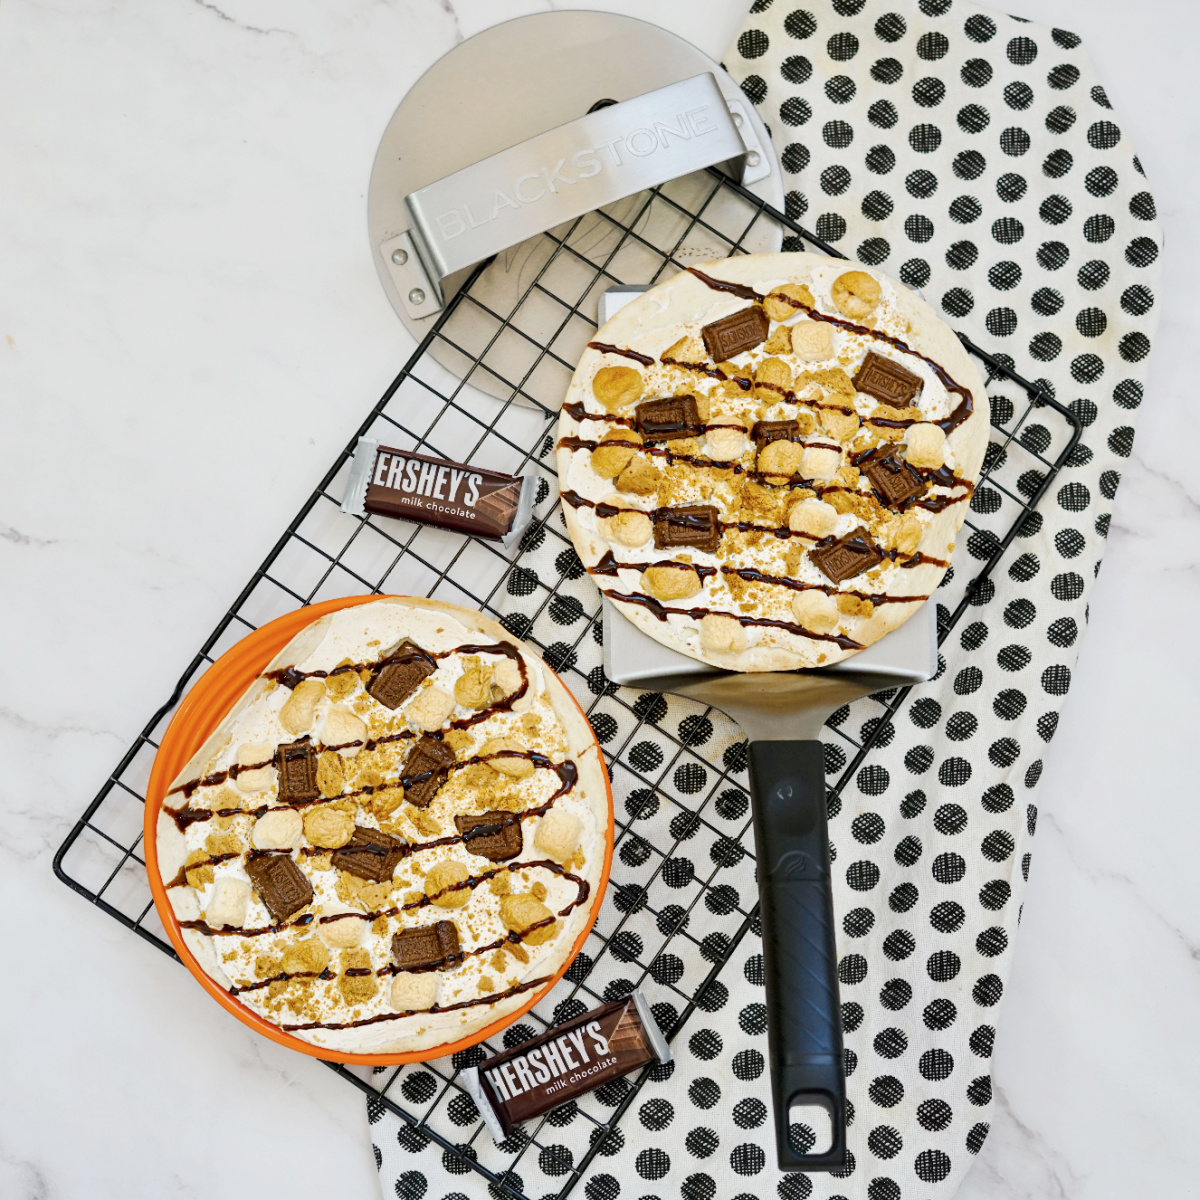 S'mores pizza made on a Blackstone griddle